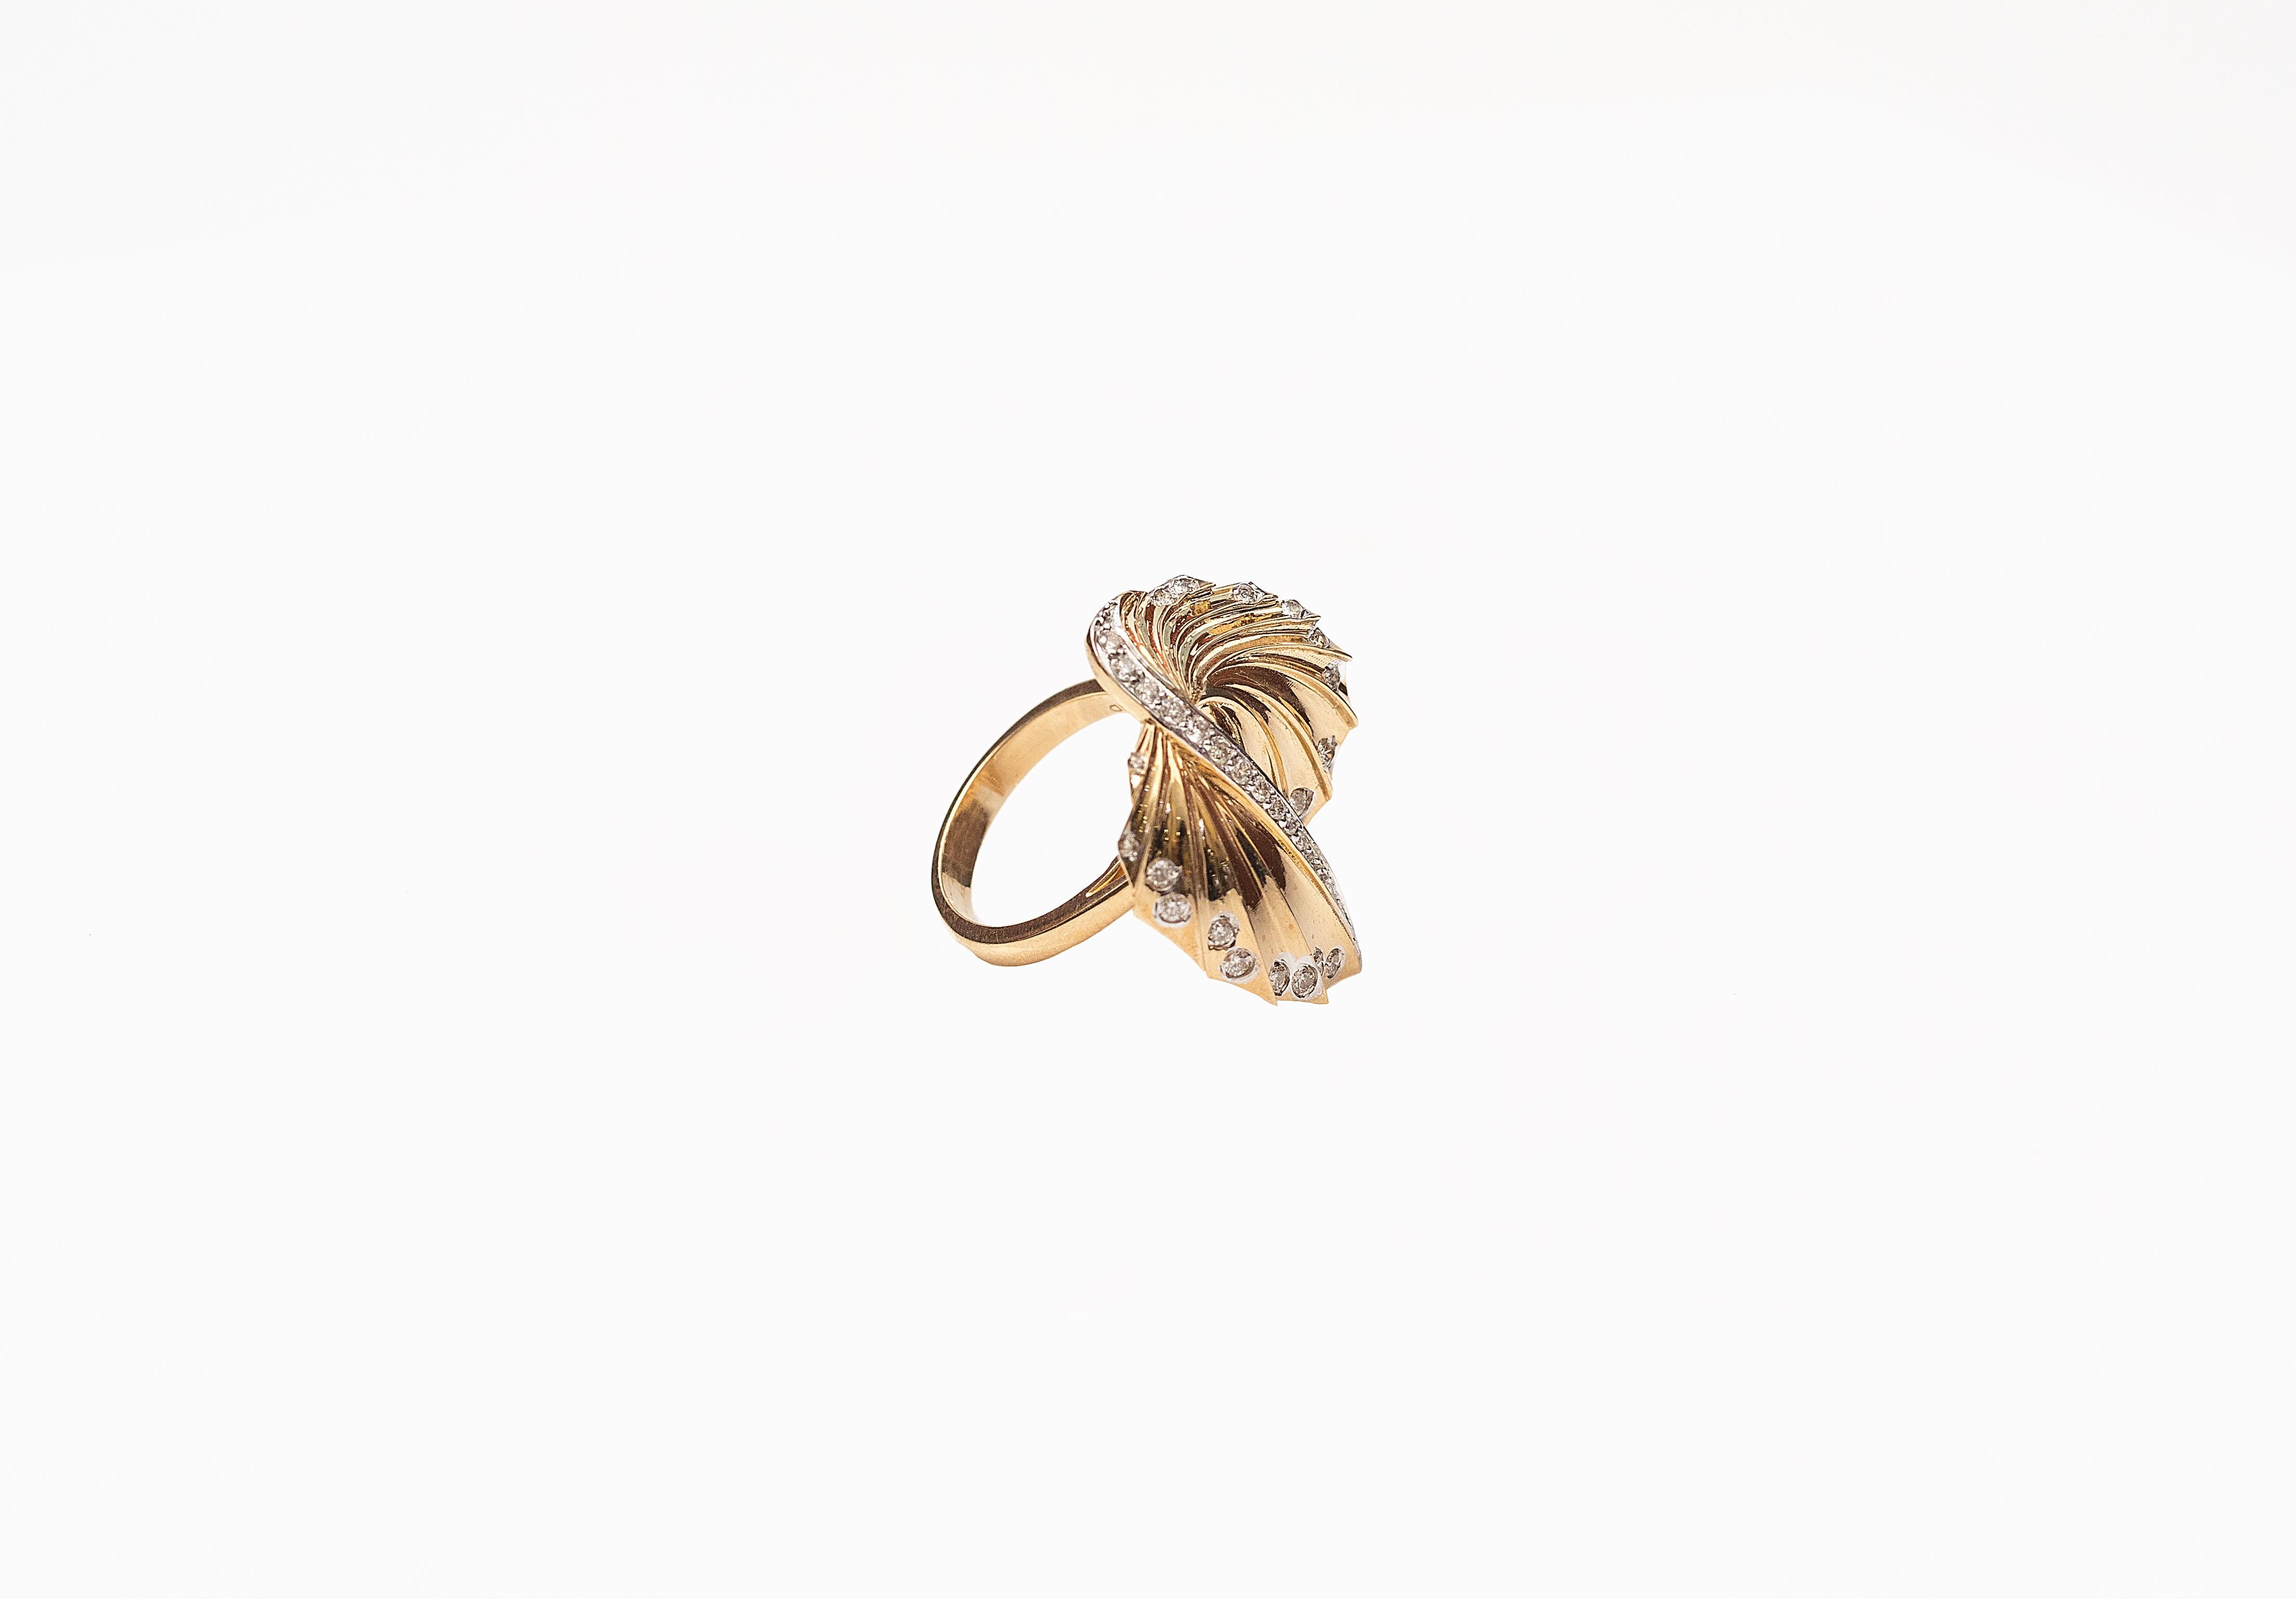 Handcrafted Cocktail Ring in 18K Yellow Gold Studded with Yellow Diamonds.
Inspired by Japanese Paper Art 